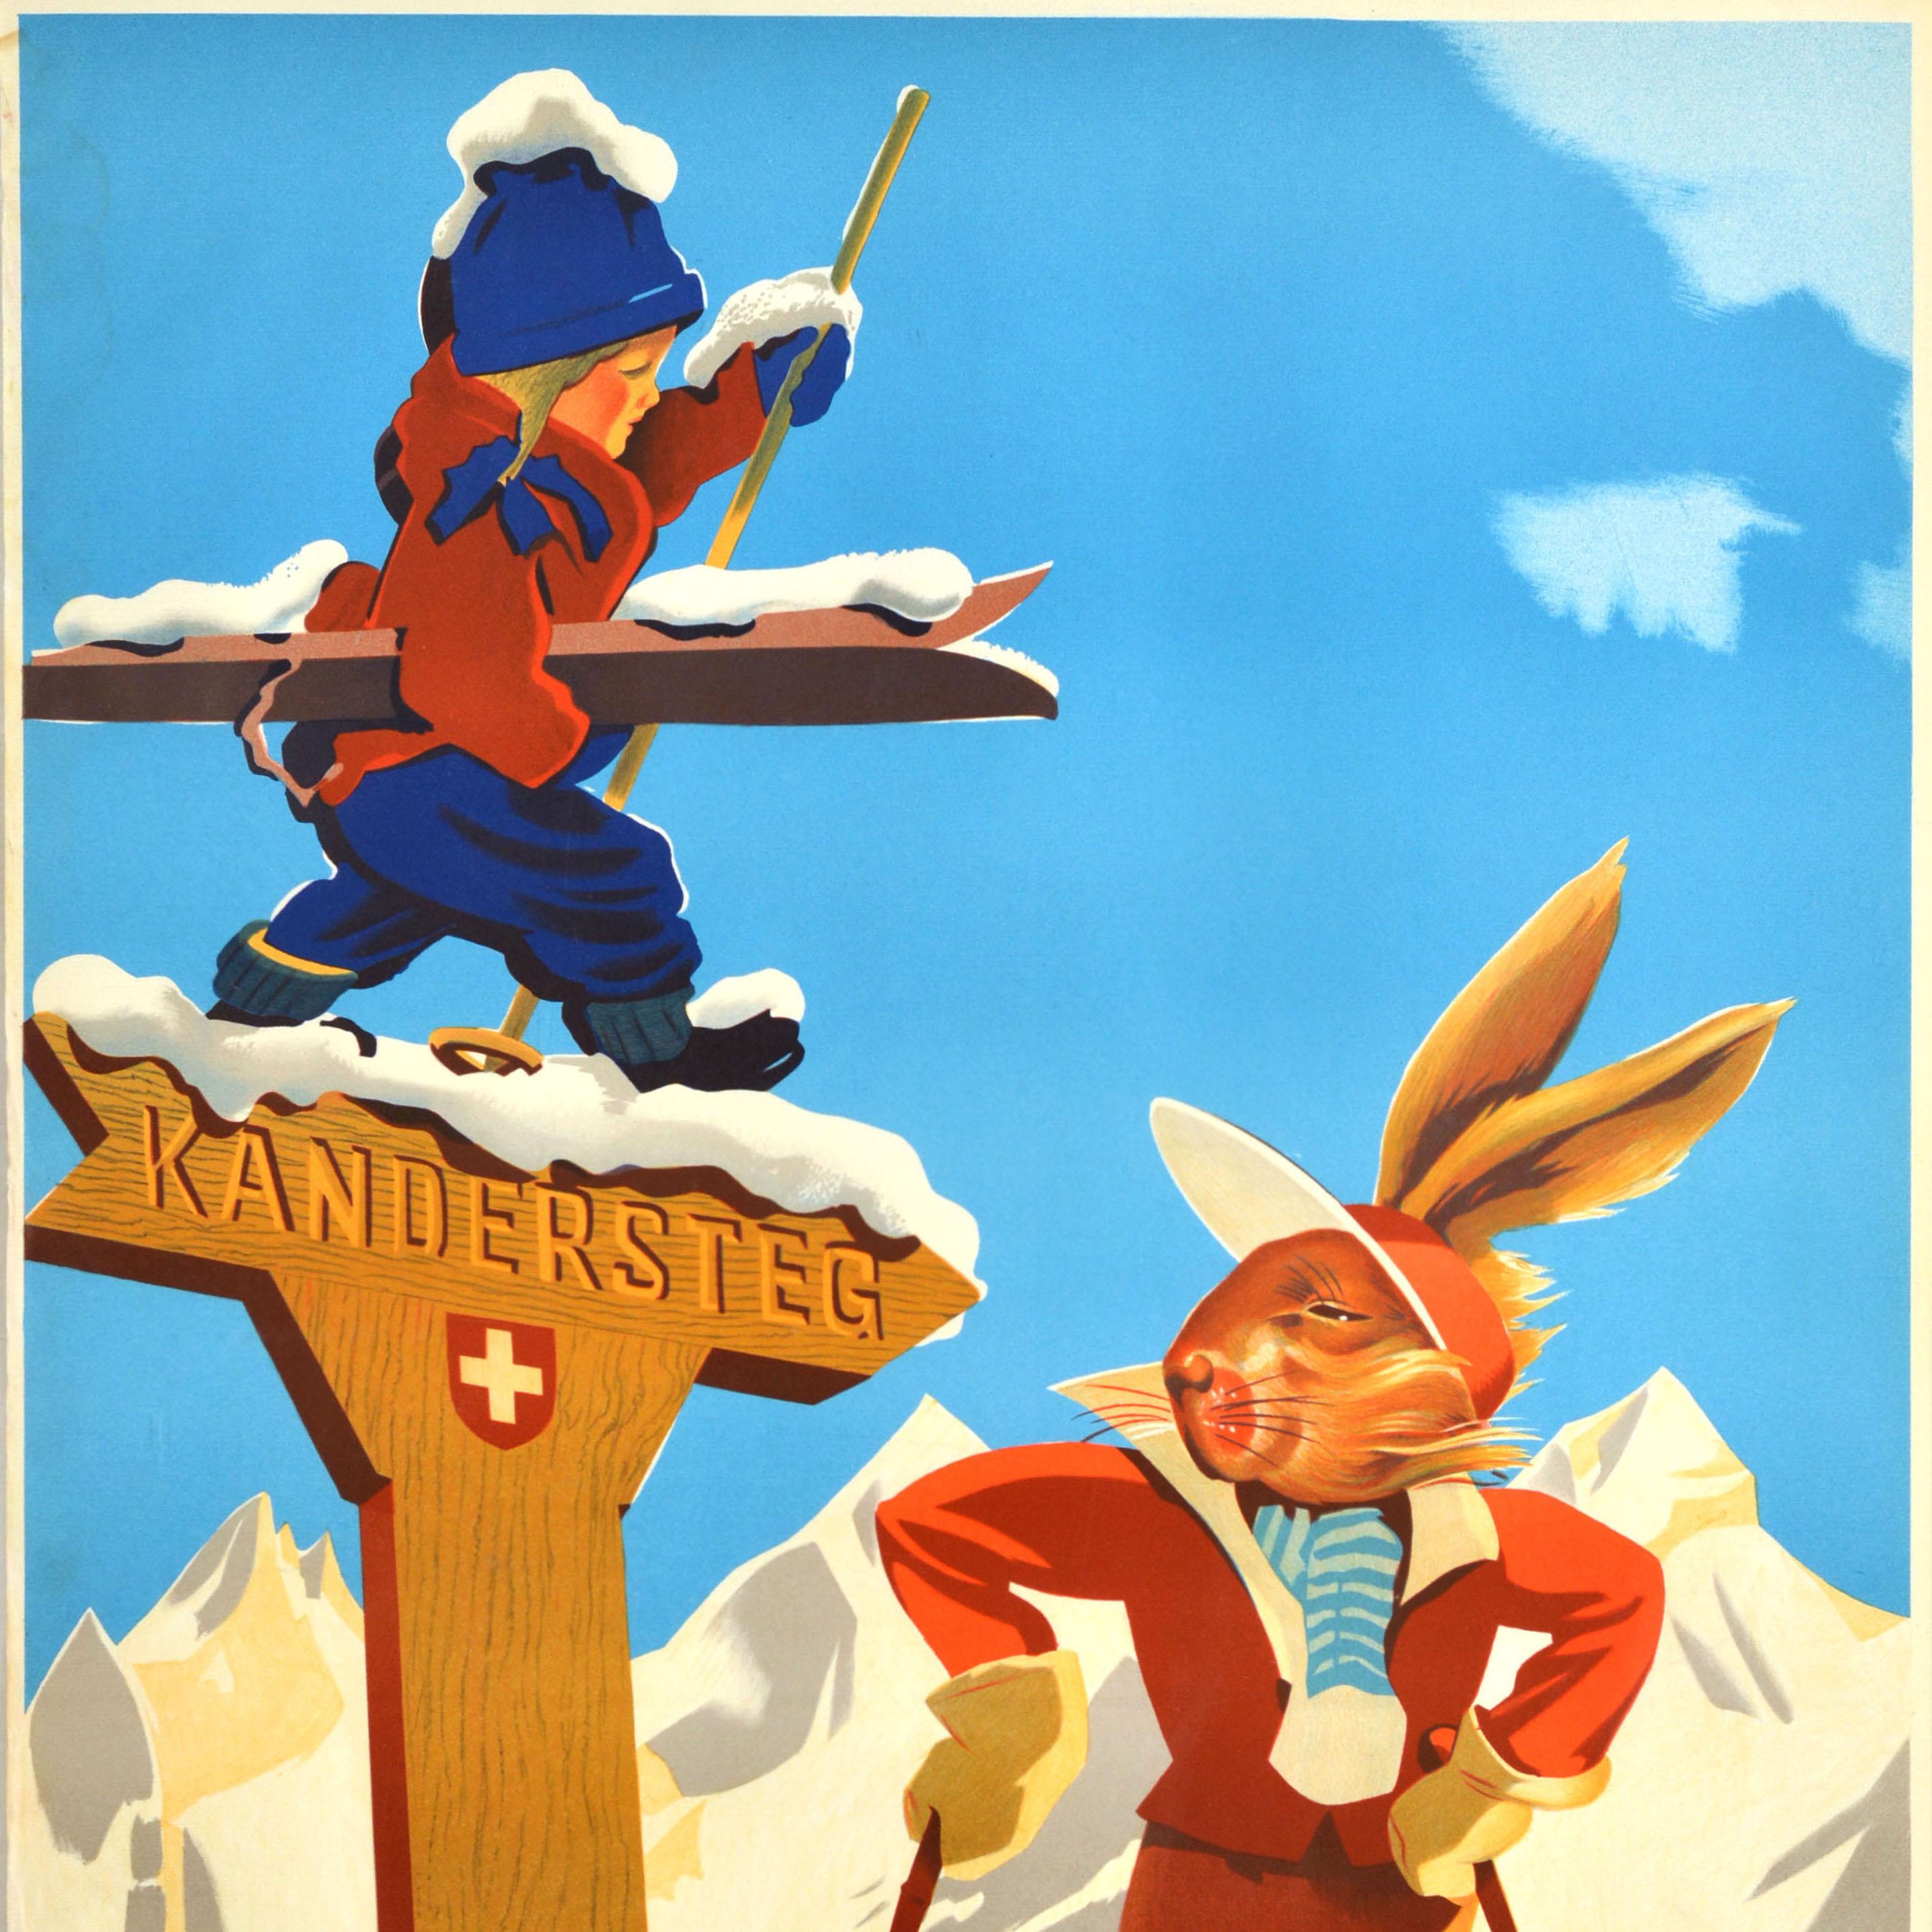 Original vintage winter sports poster for the Swiss alpine resort of Kandersteg Schweiz Suisse Switzerland located in the Bernese Oberland alps featuring a fun illustration of a hare on skis looking at a wooden Kandersteg road sign marked with a